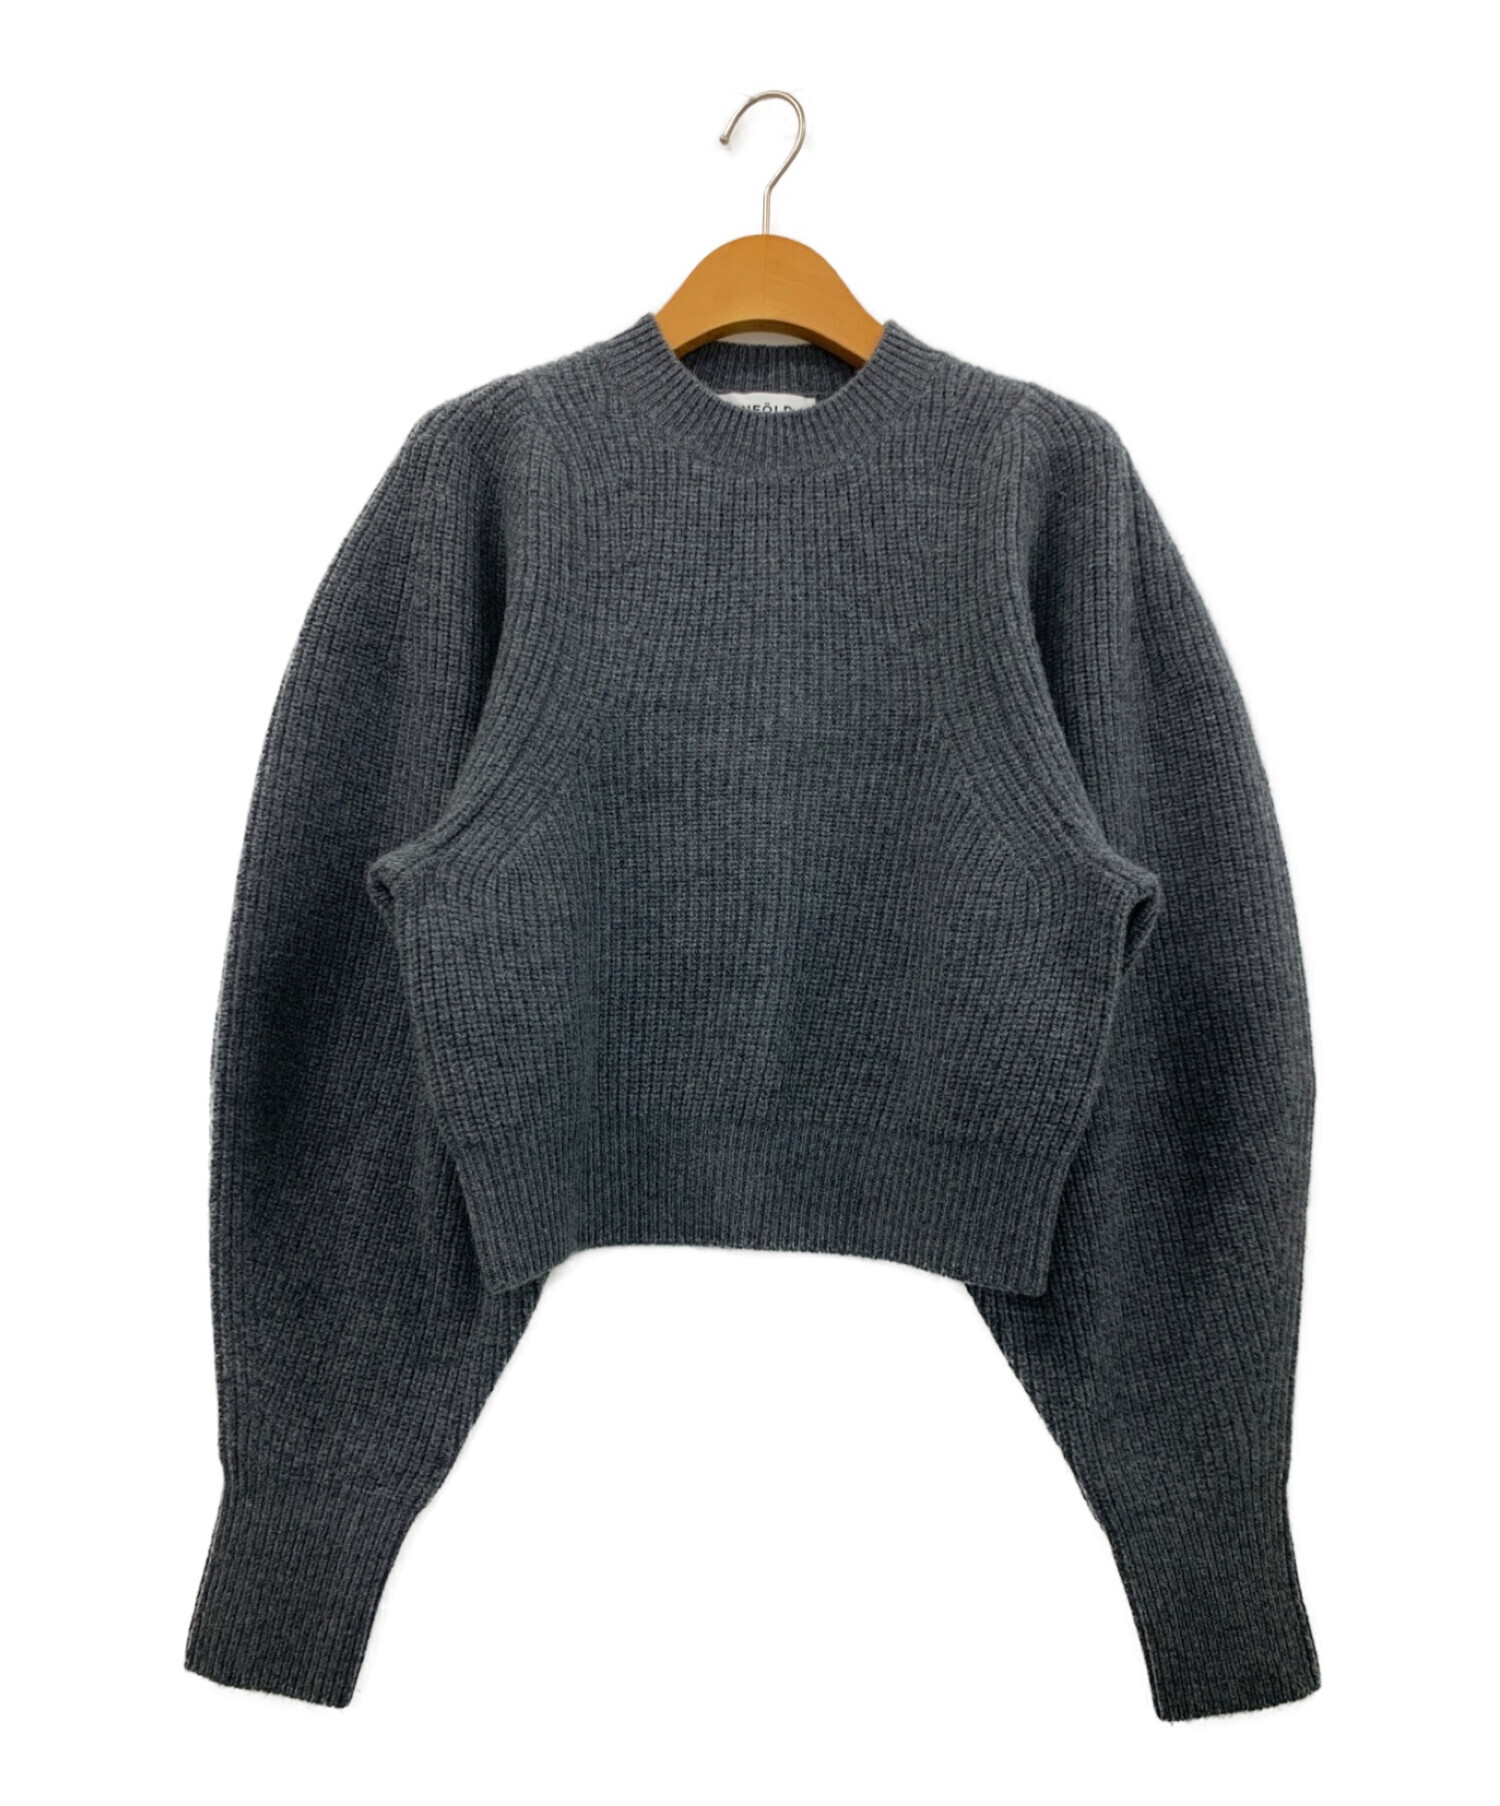 ENFOLD (エンフォルド) CROPPED WIDE ARM PULLOVER グレー サイズ:38